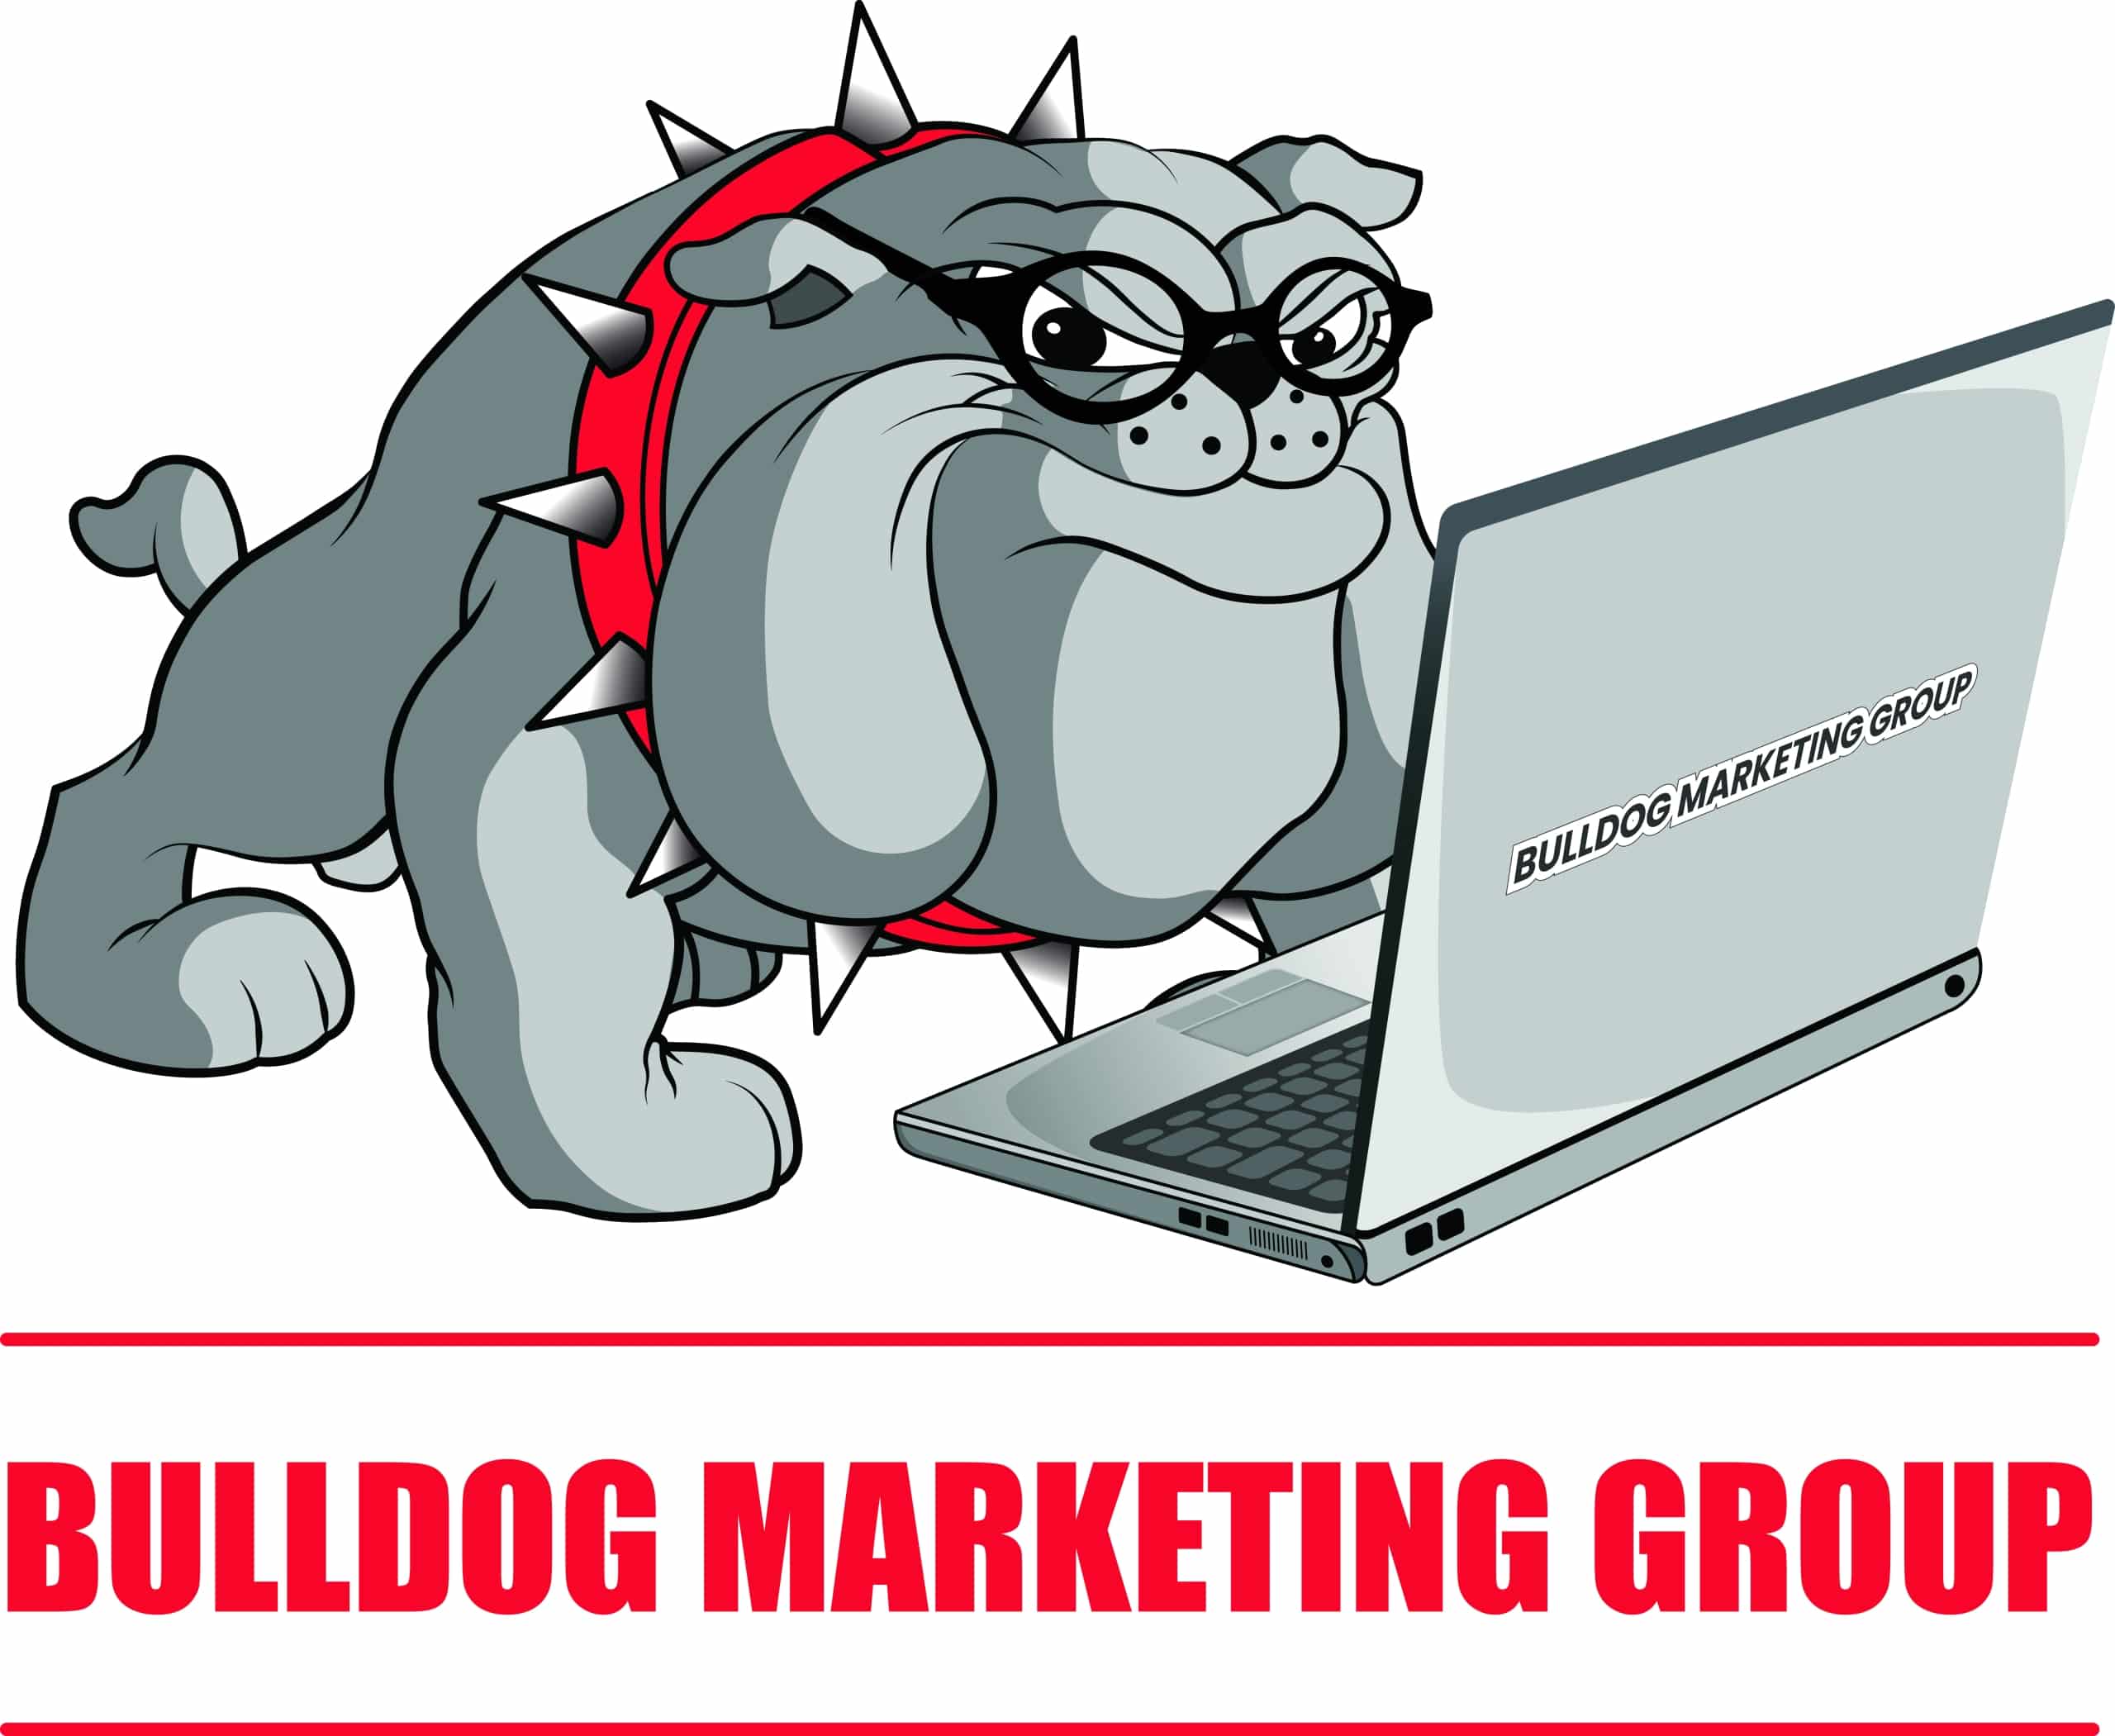 LeakTronics Launched Bulldog Marketing Group Services